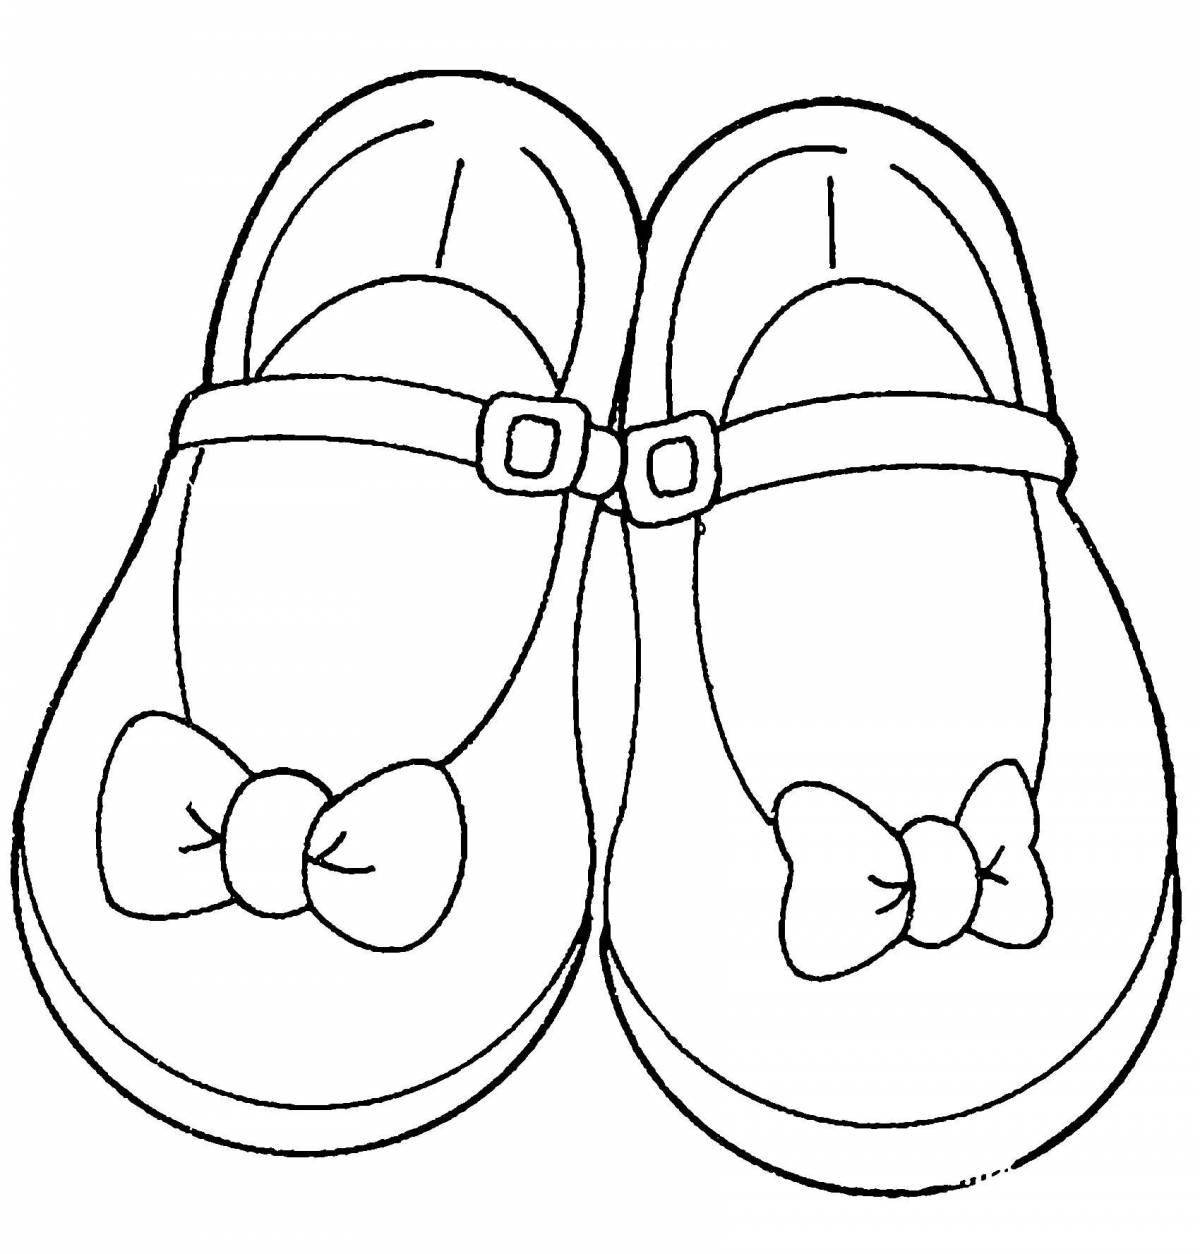 Magic slippers coloring page